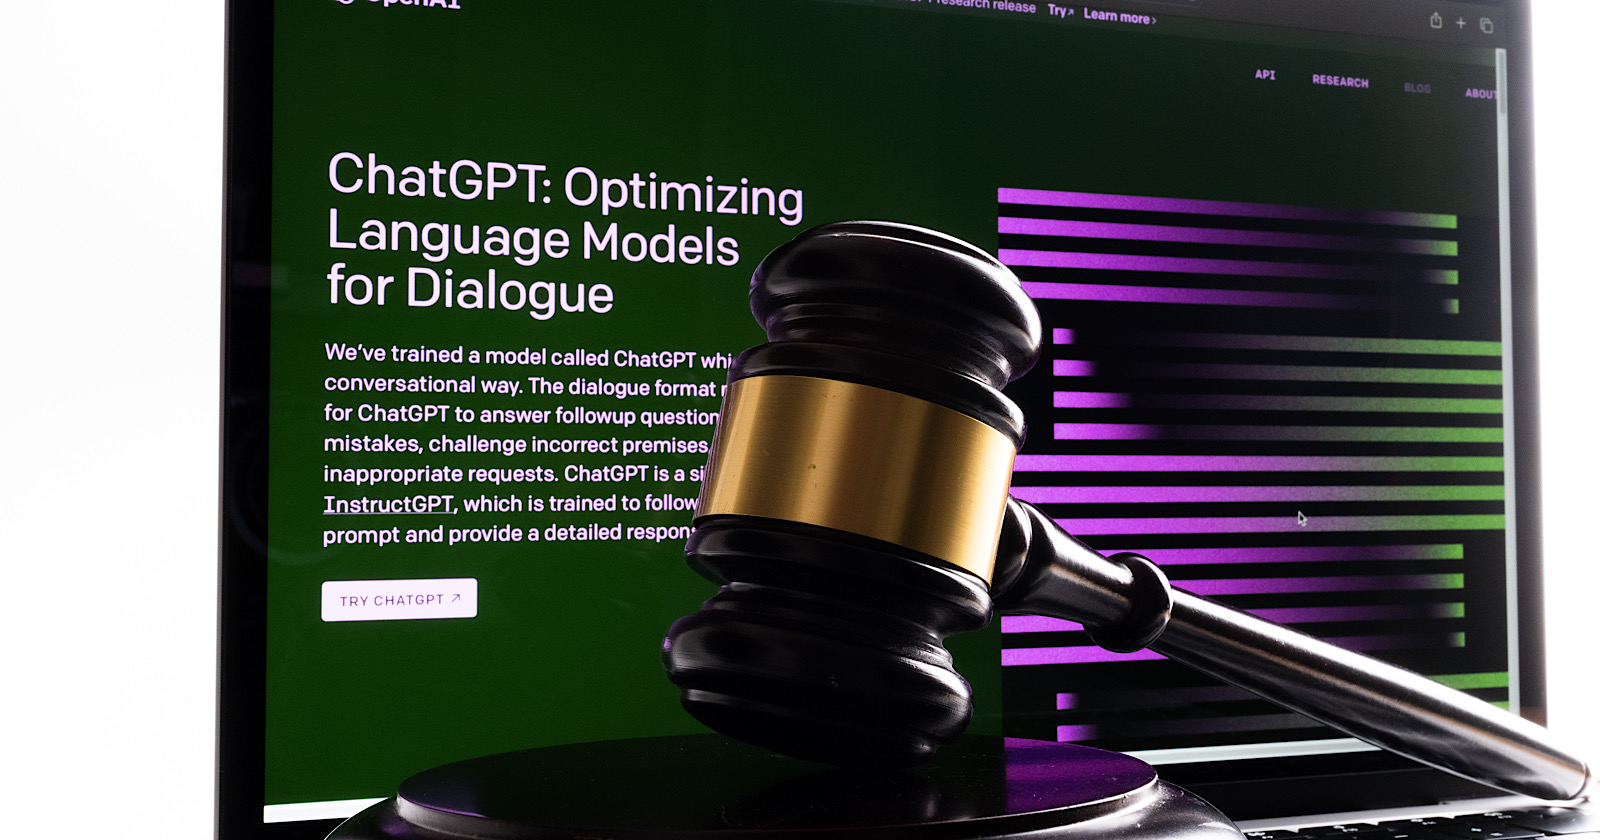 ChatGPT creator is facing multiple lawsuits for copyright and privacy violations